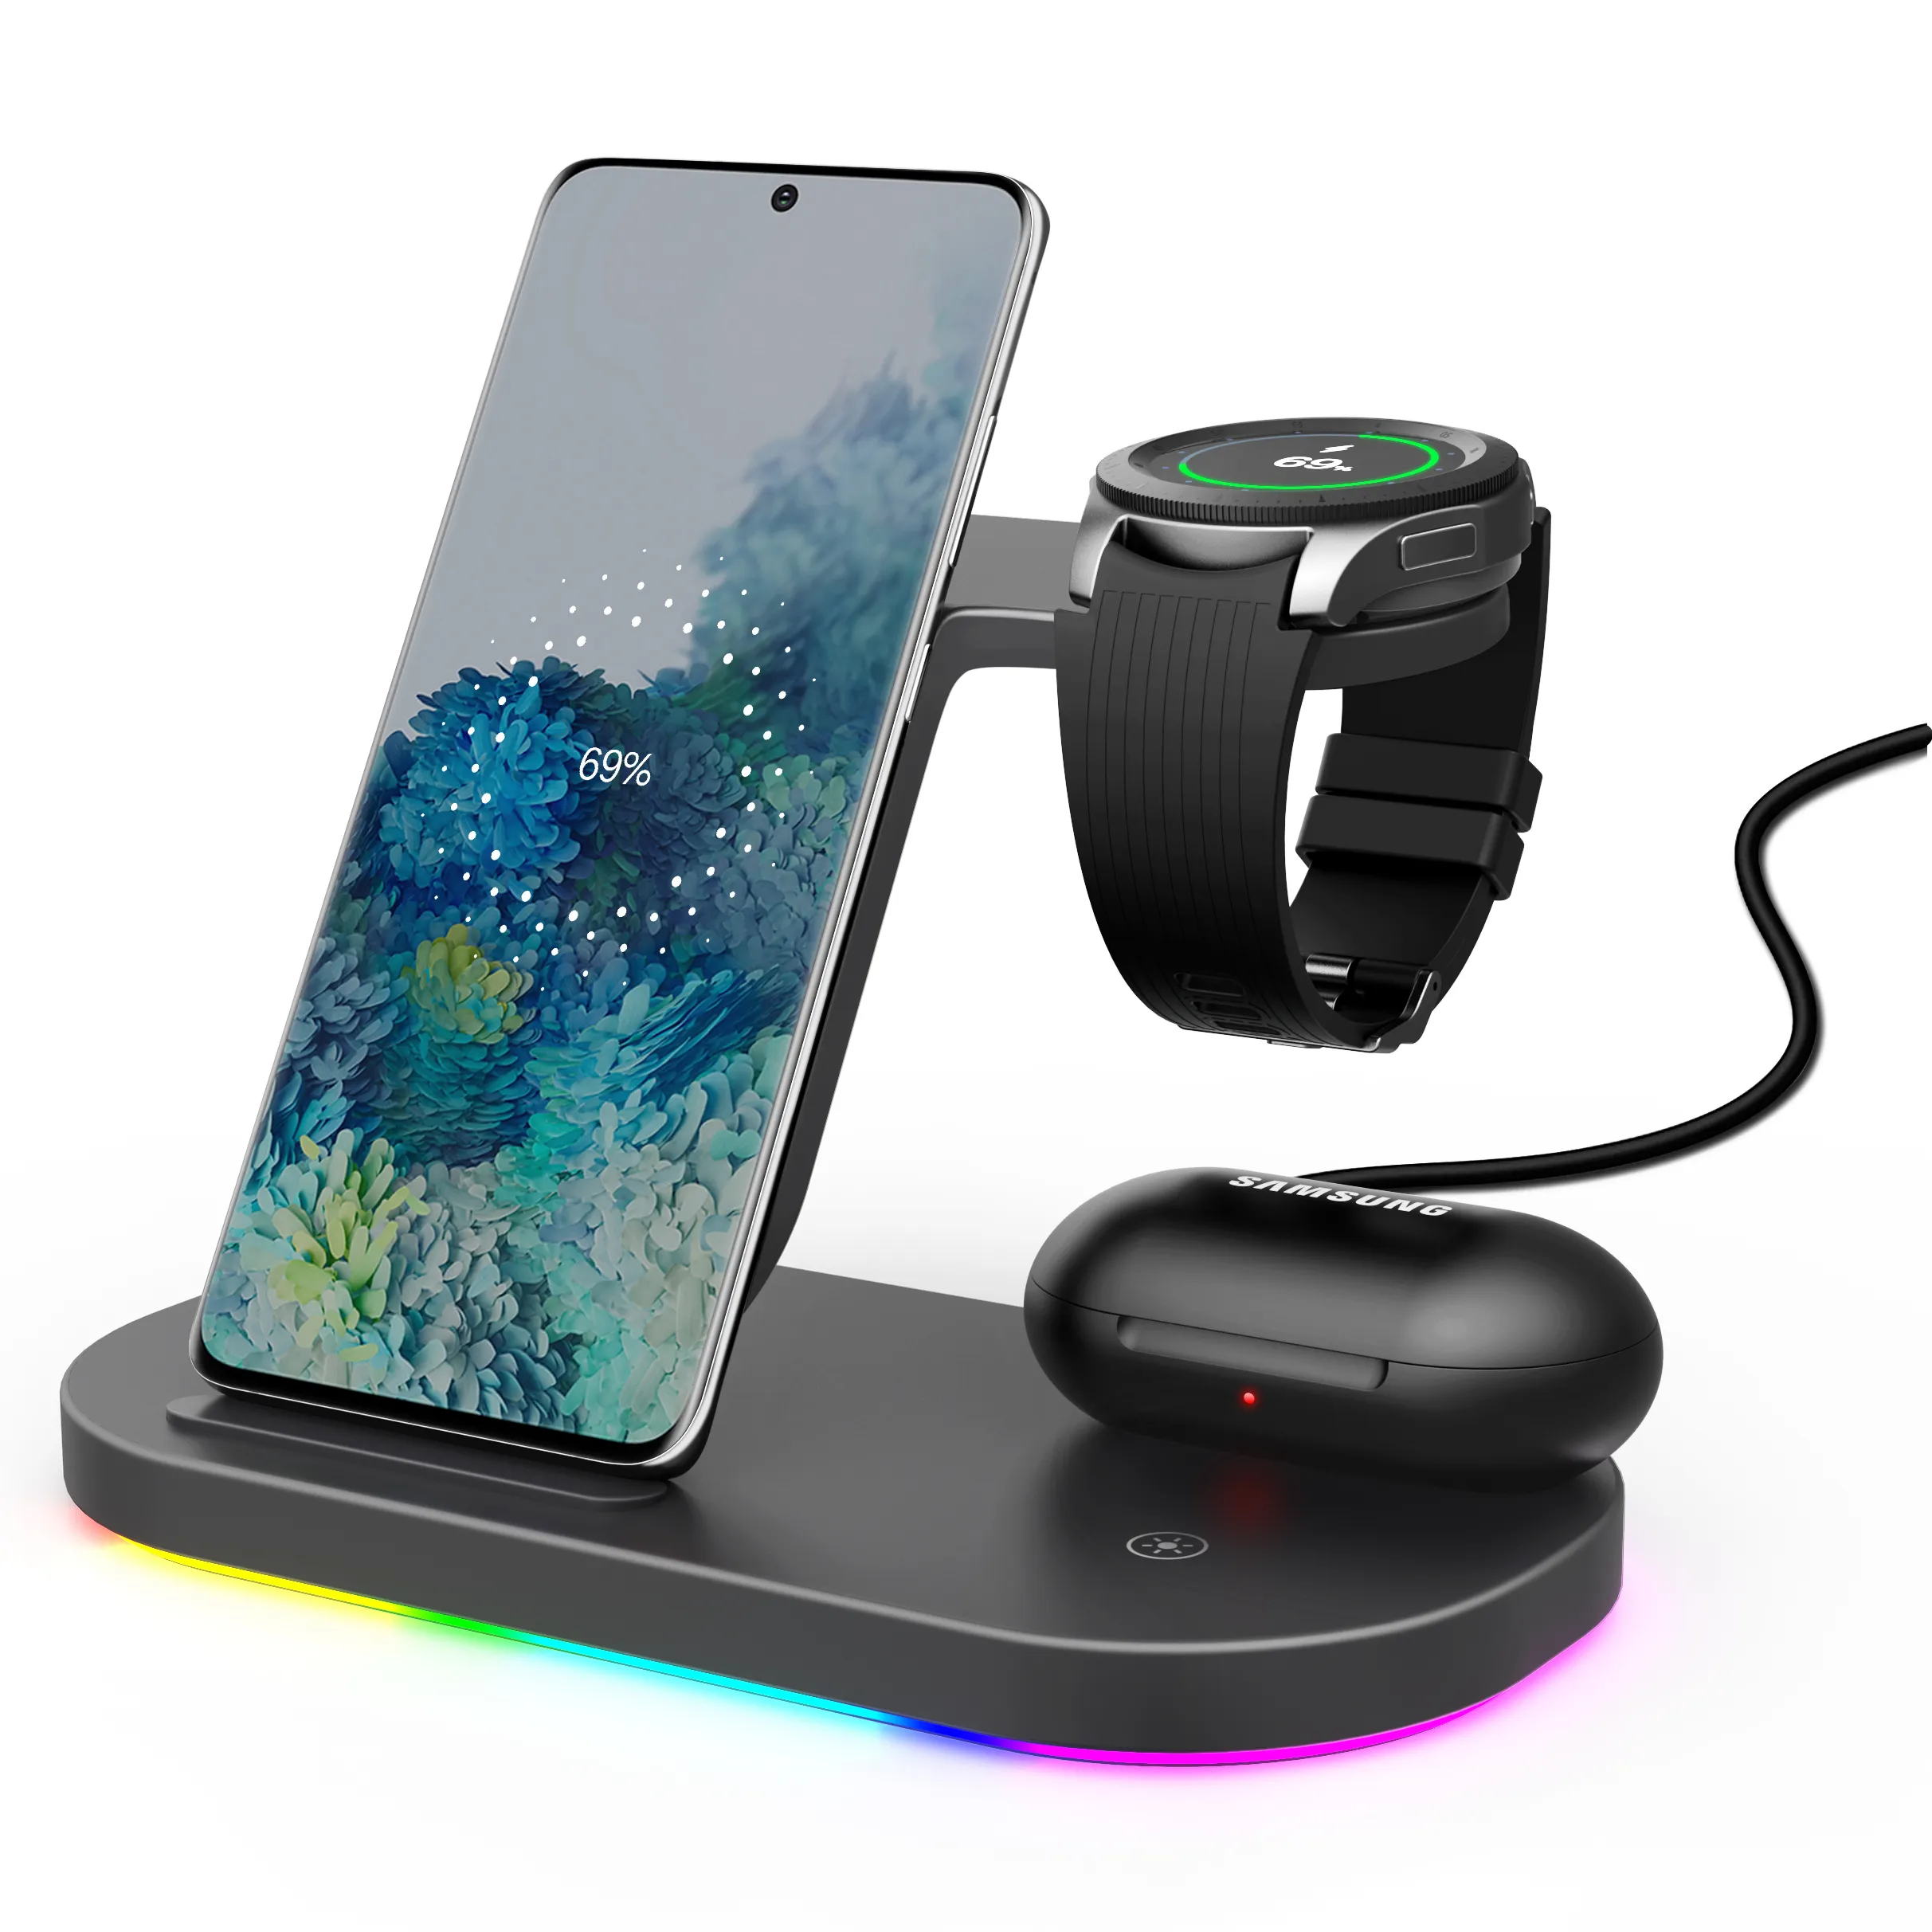 Qi Charger 15w Wireless Charger 3 In 1 15W Fast Qi Wireless Charging Station For Samsung Galaxy S20/S10/S9/S8/Note 10